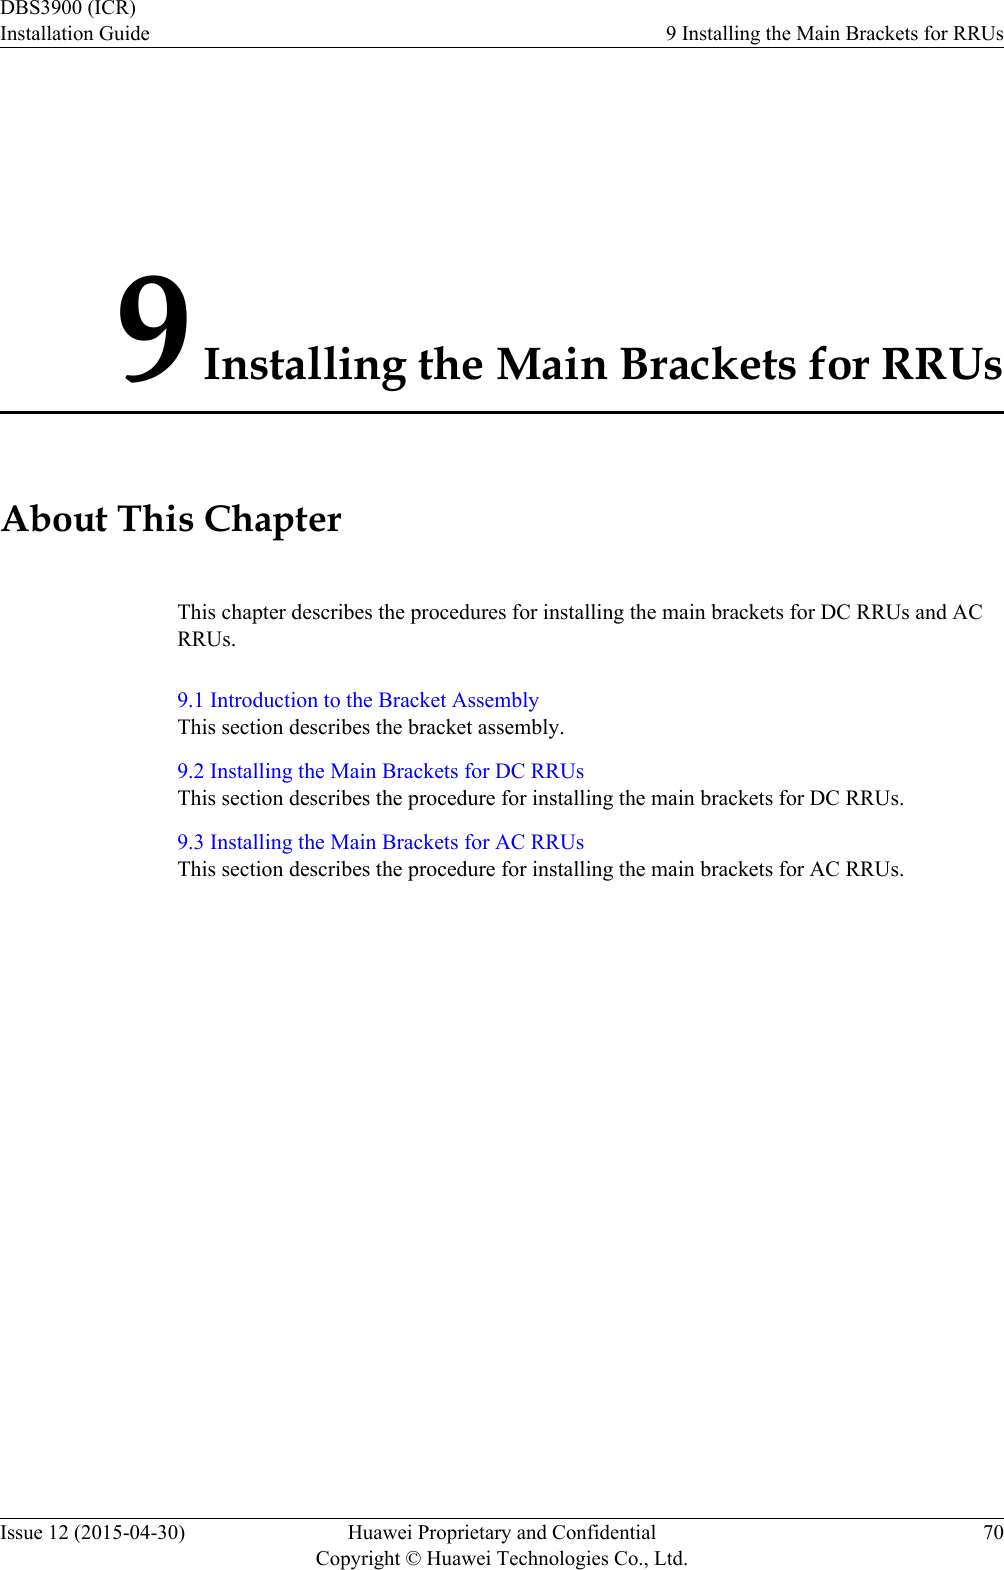 9 Installing the Main Brackets for RRUsAbout This ChapterThis chapter describes the procedures for installing the main brackets for DC RRUs and ACRRUs.9.1 Introduction to the Bracket AssemblyThis section describes the bracket assembly.9.2 Installing the Main Brackets for DC RRUsThis section describes the procedure for installing the main brackets for DC RRUs.9.3 Installing the Main Brackets for AC RRUsThis section describes the procedure for installing the main brackets for AC RRUs.DBS3900 (ICR)Installation Guide 9 Installing the Main Brackets for RRUsIssue 12 (2015-04-30) Huawei Proprietary and ConfidentialCopyright © Huawei Technologies Co., Ltd.70